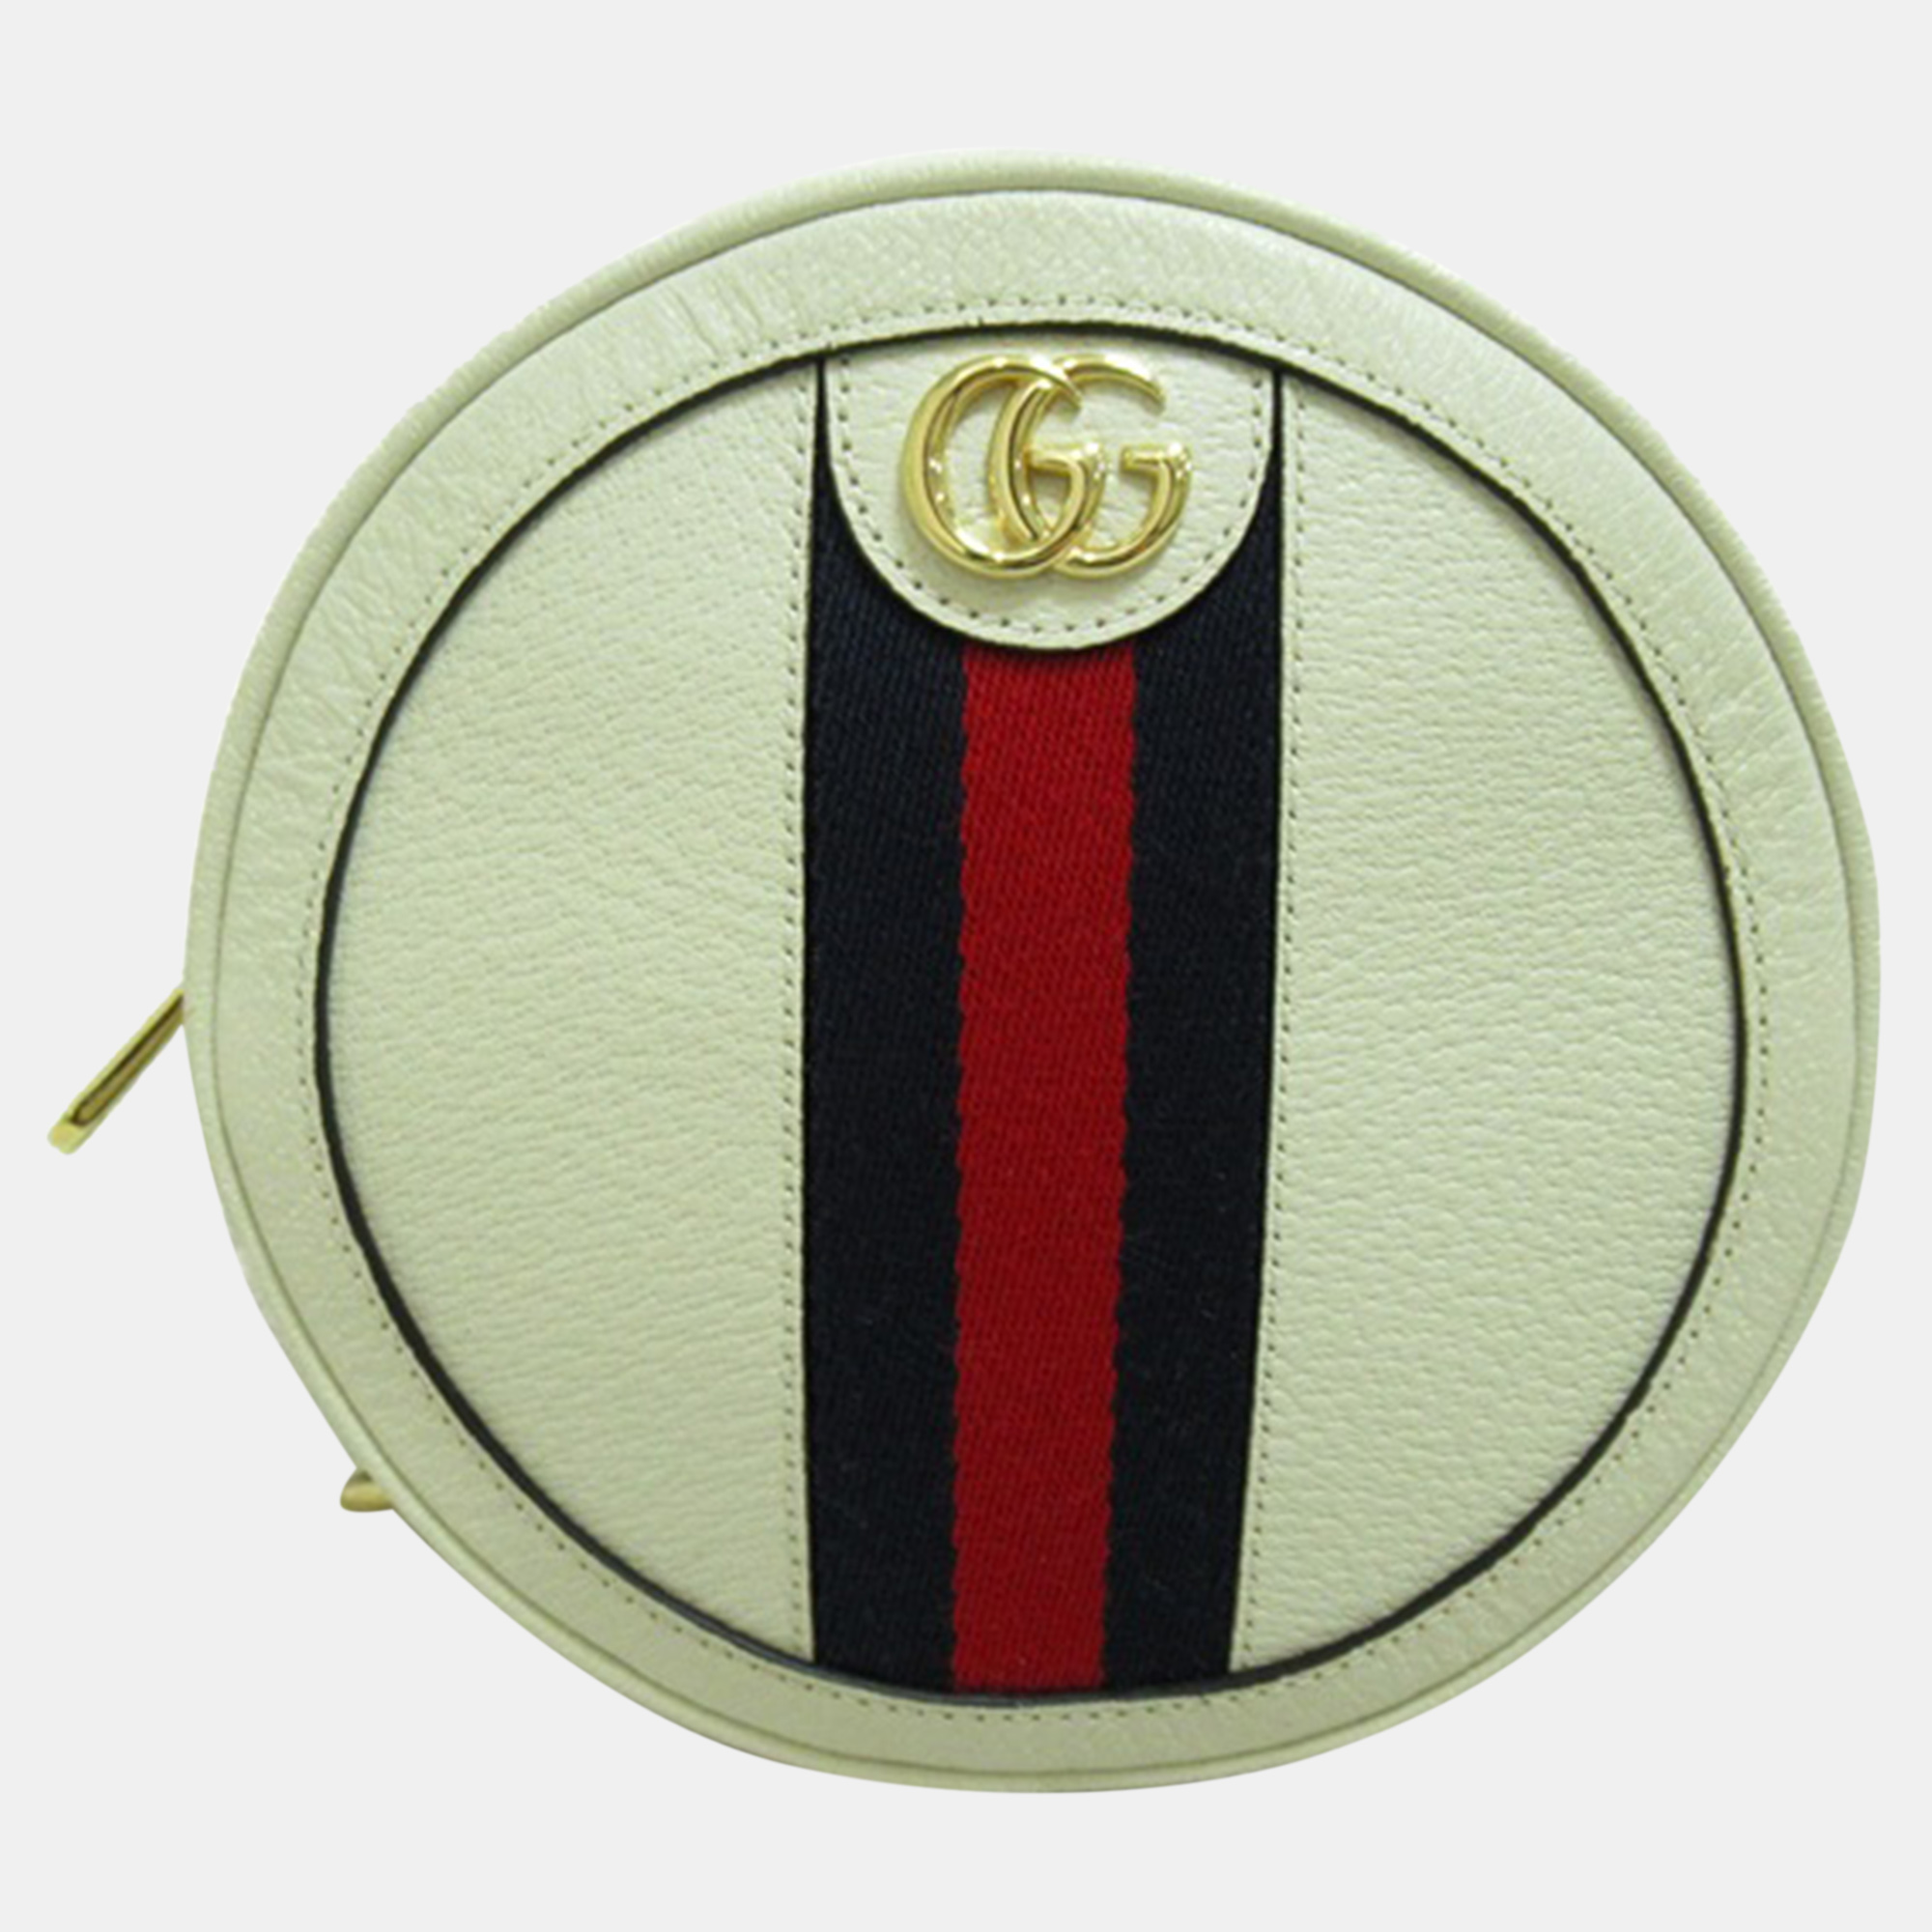 Gucci white leather mini ophidia backpack